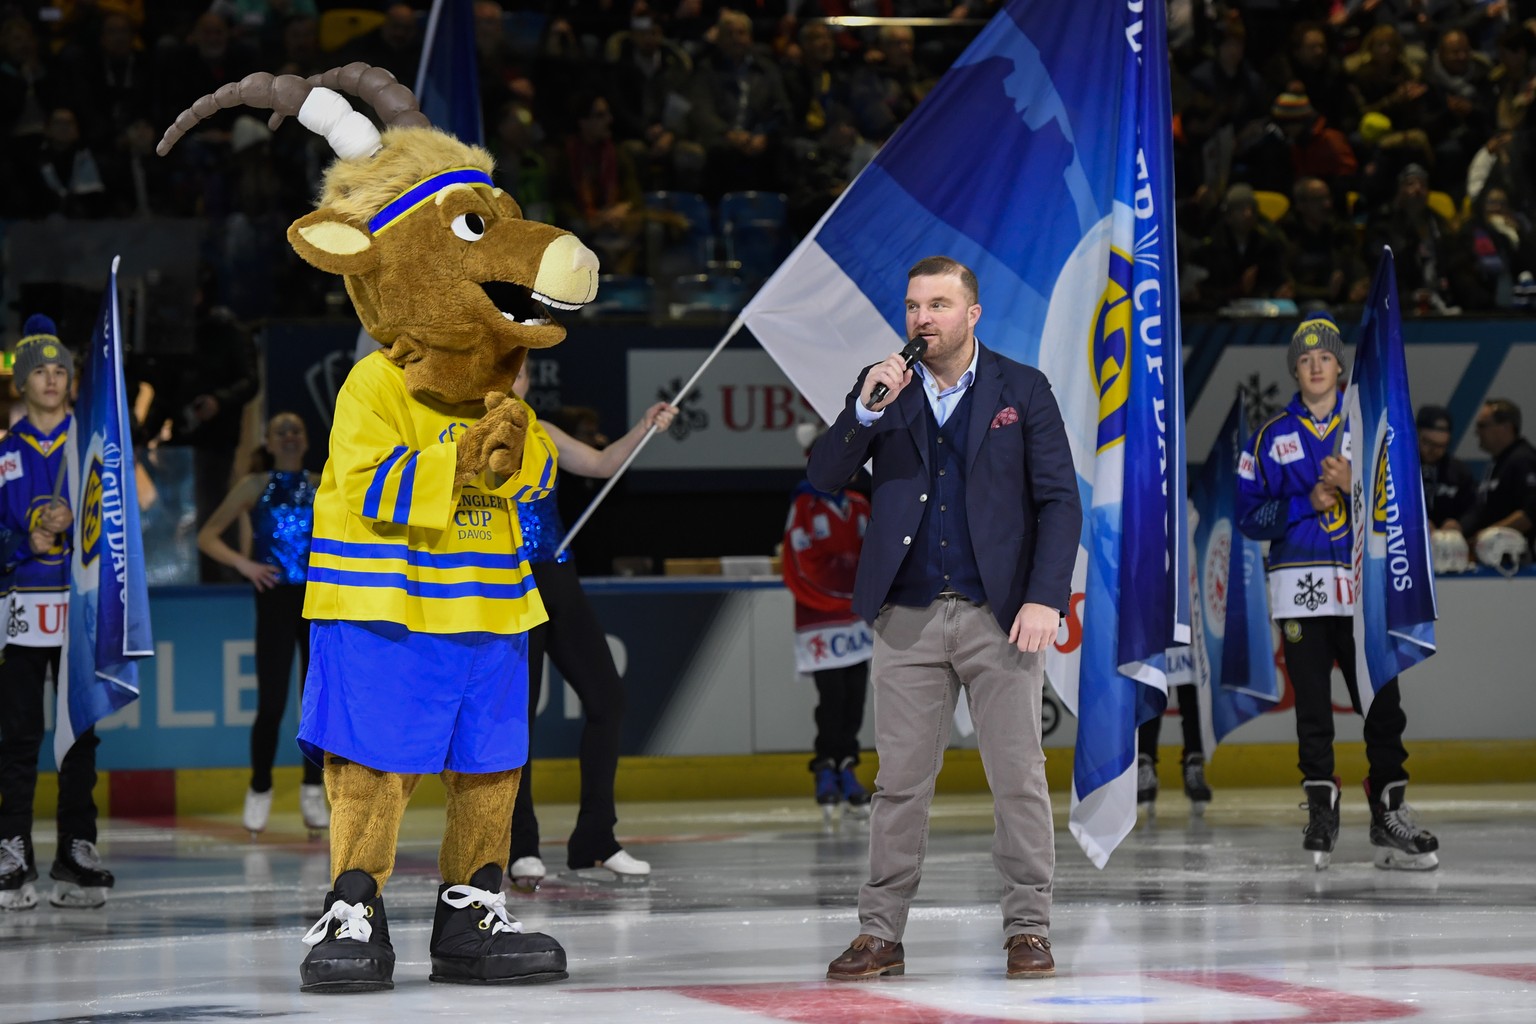 Mascotte Hitsch and oc president Marc Gianola prior the game between HC Ambri-Piotta and Salavat Yulaev Ufa, at the 93th Spengler Cup ice hockey tournament in Davos, Switzerland, Thursday, December 26 ...